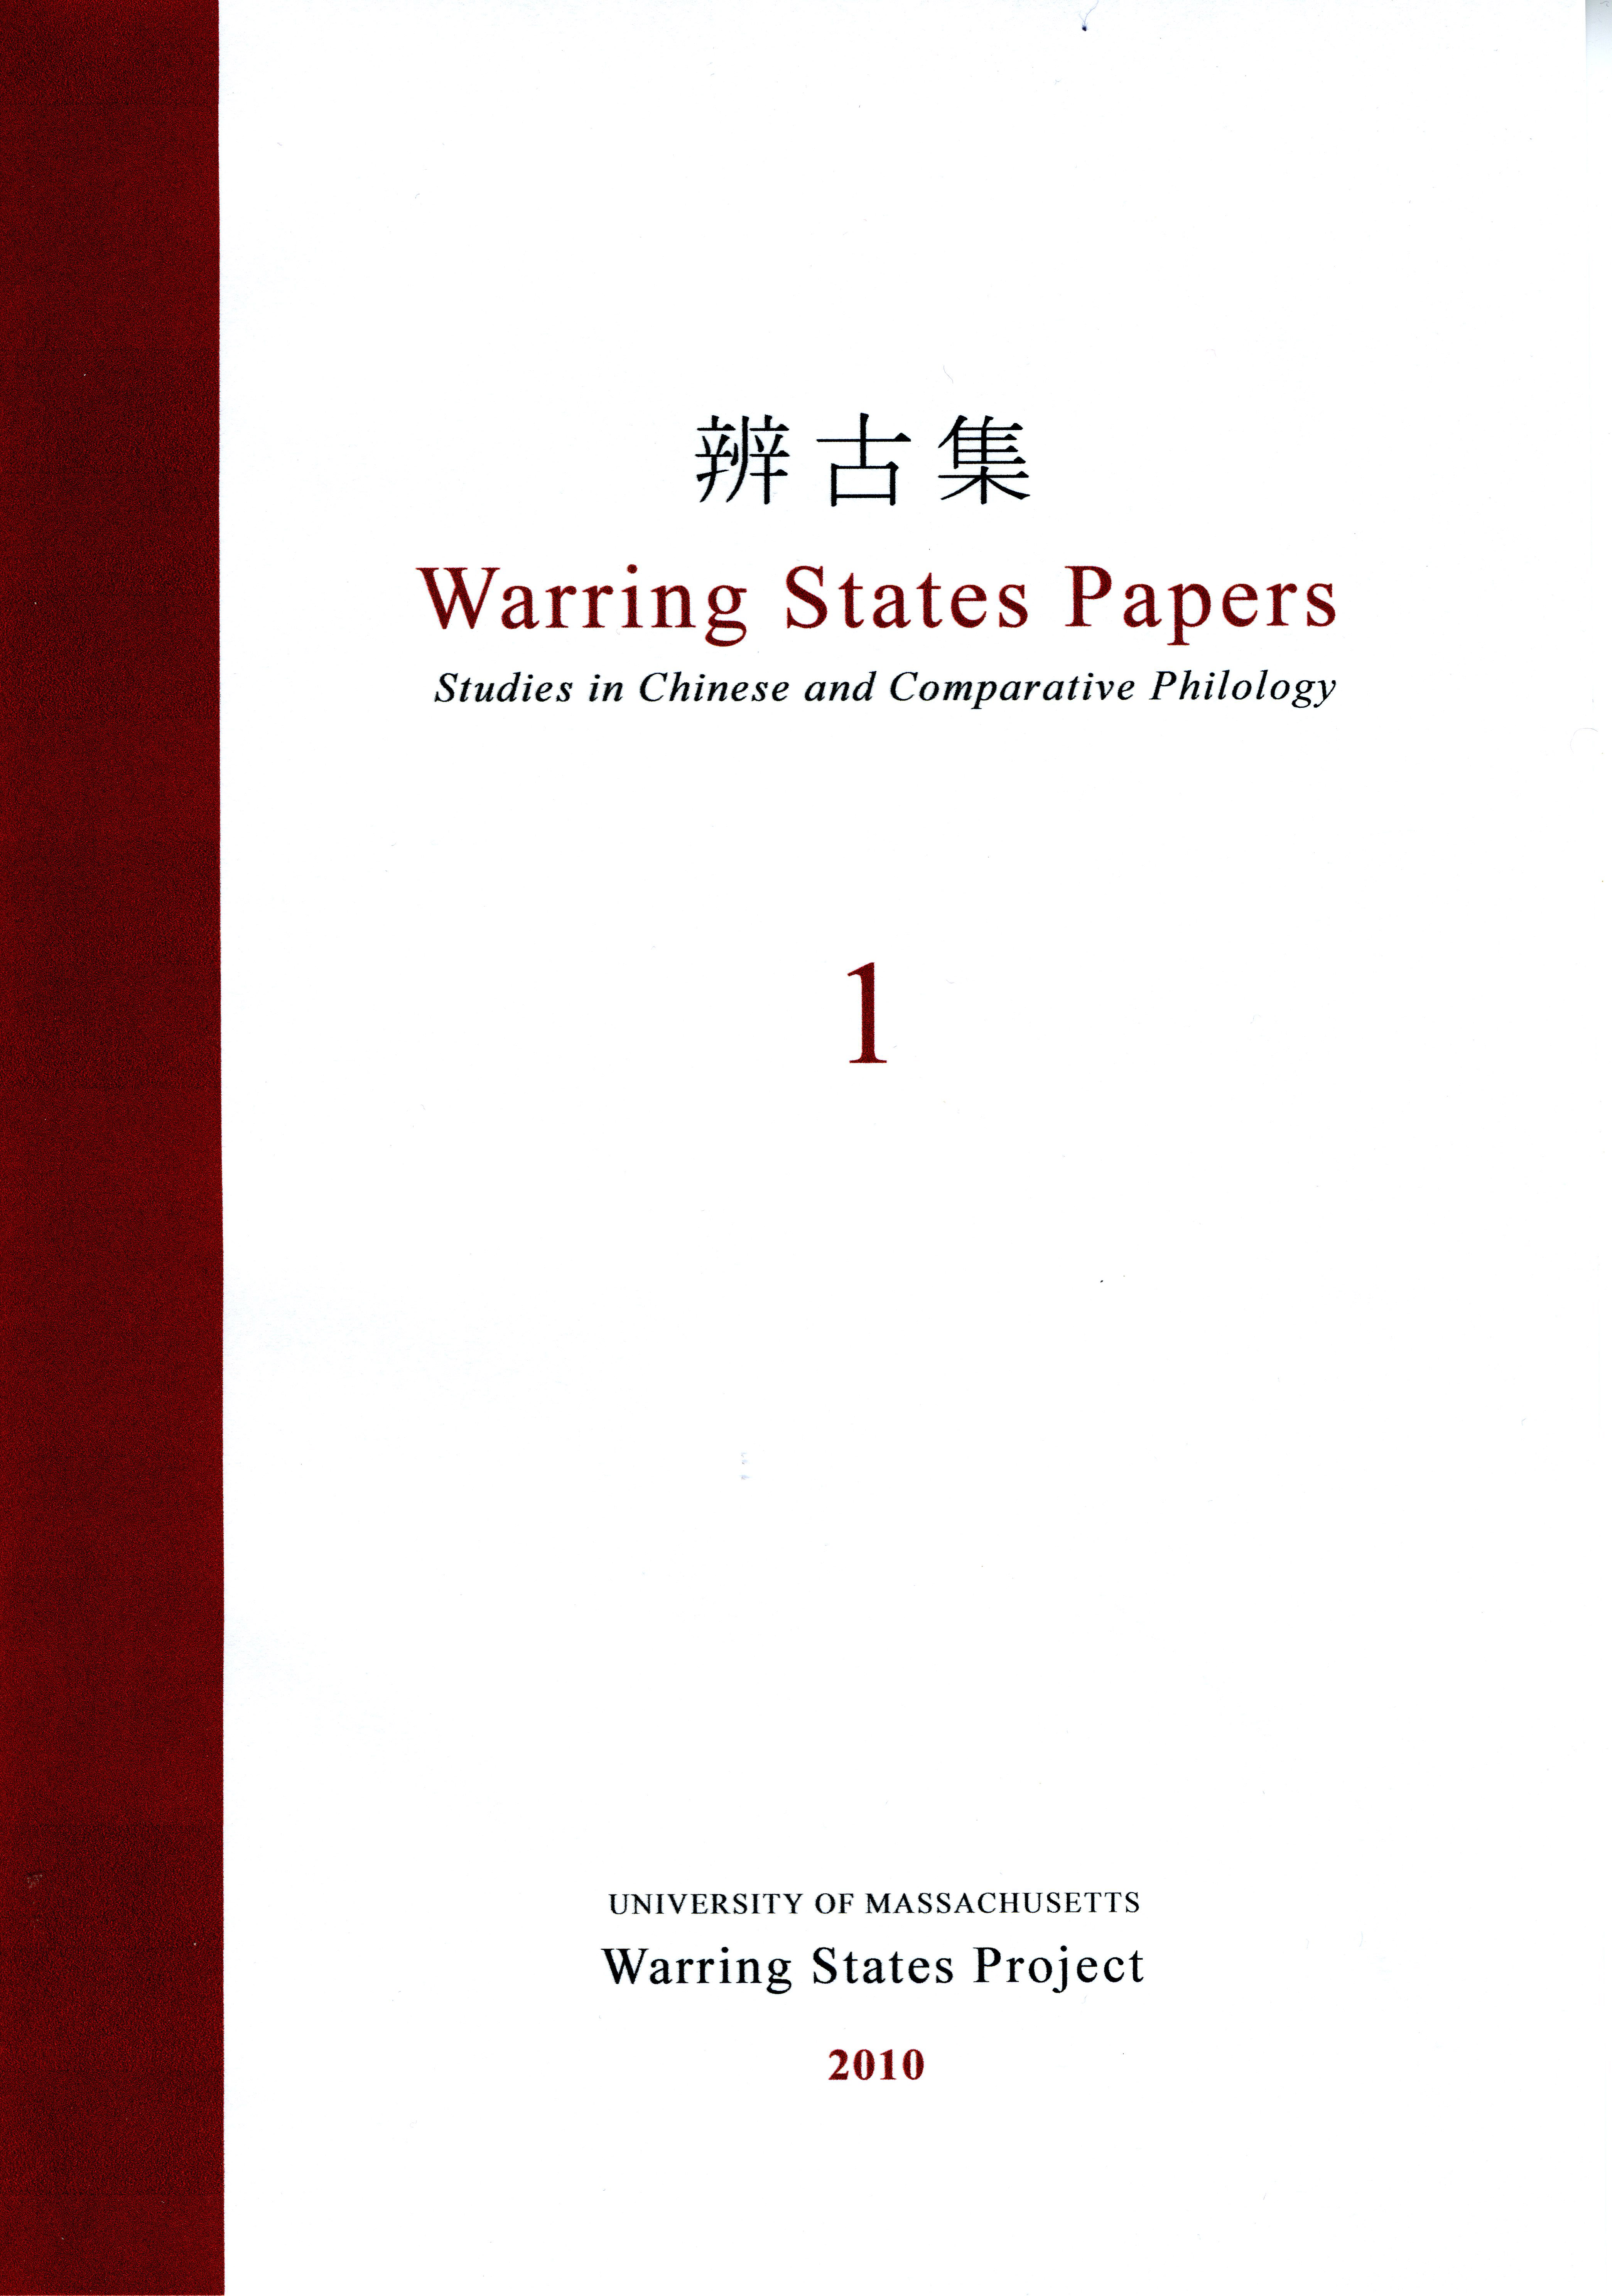 Warring States Papers v1 cover